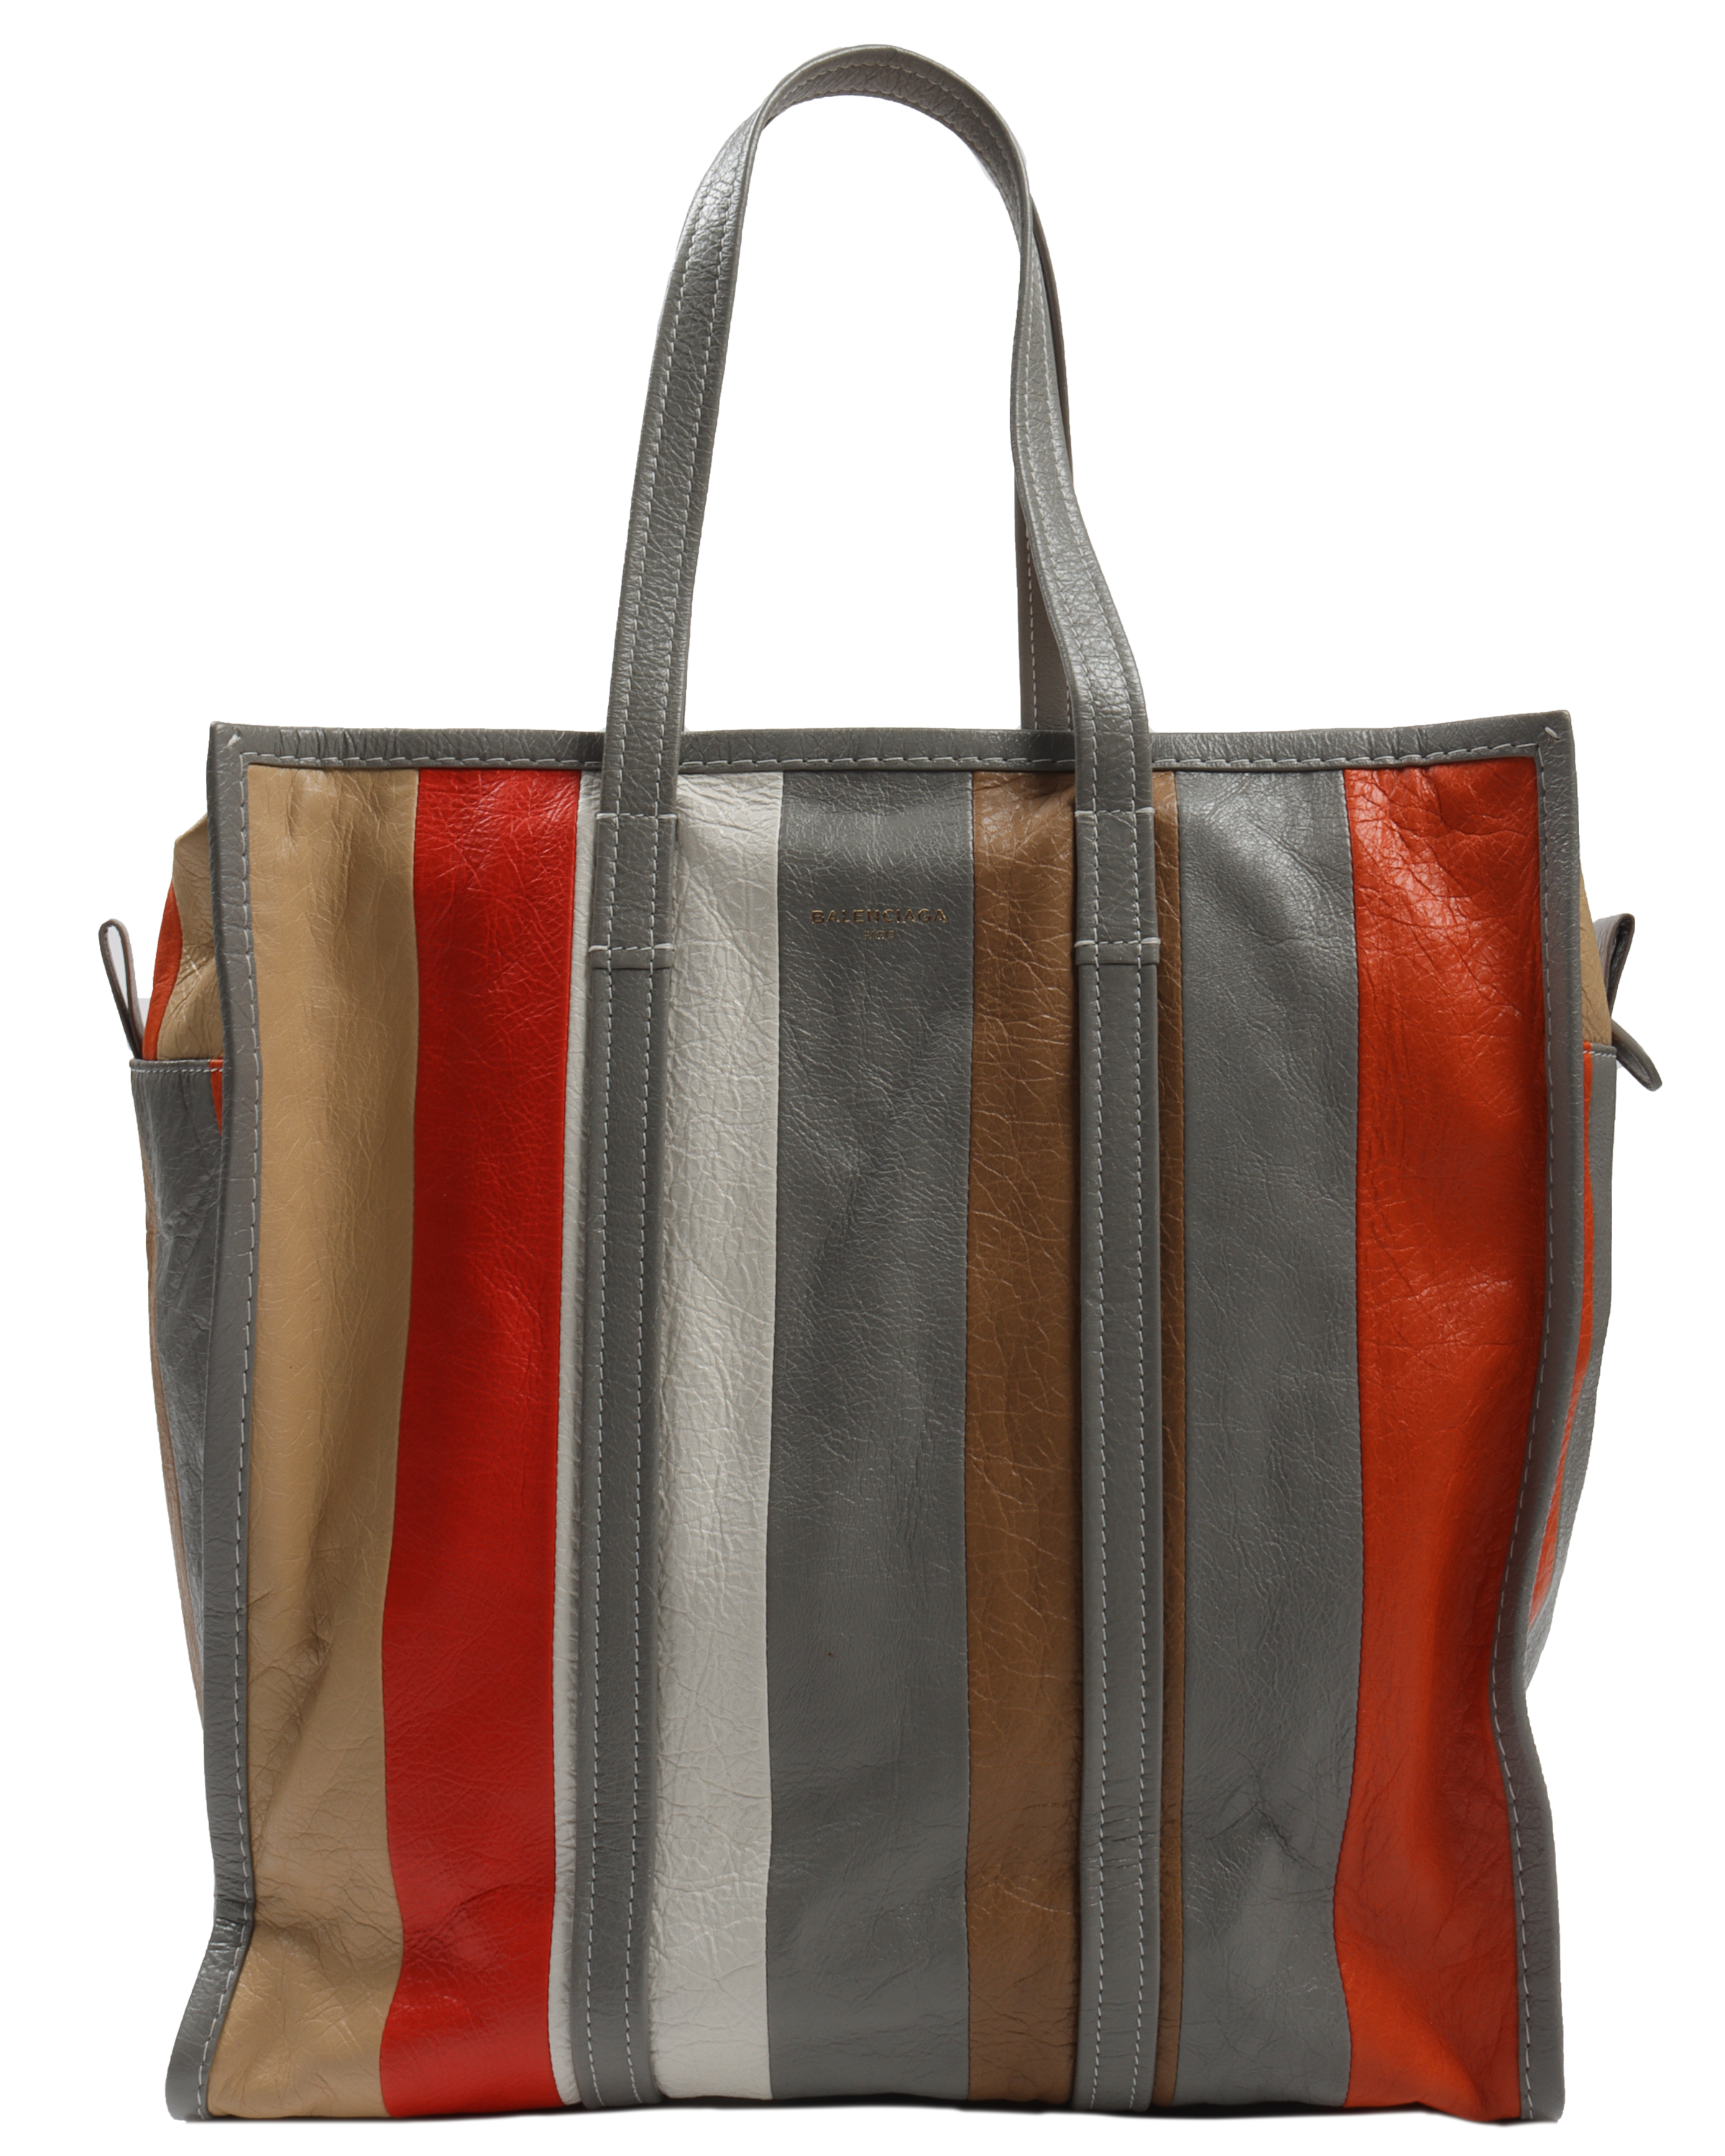 Tan and Red Bazar Bag